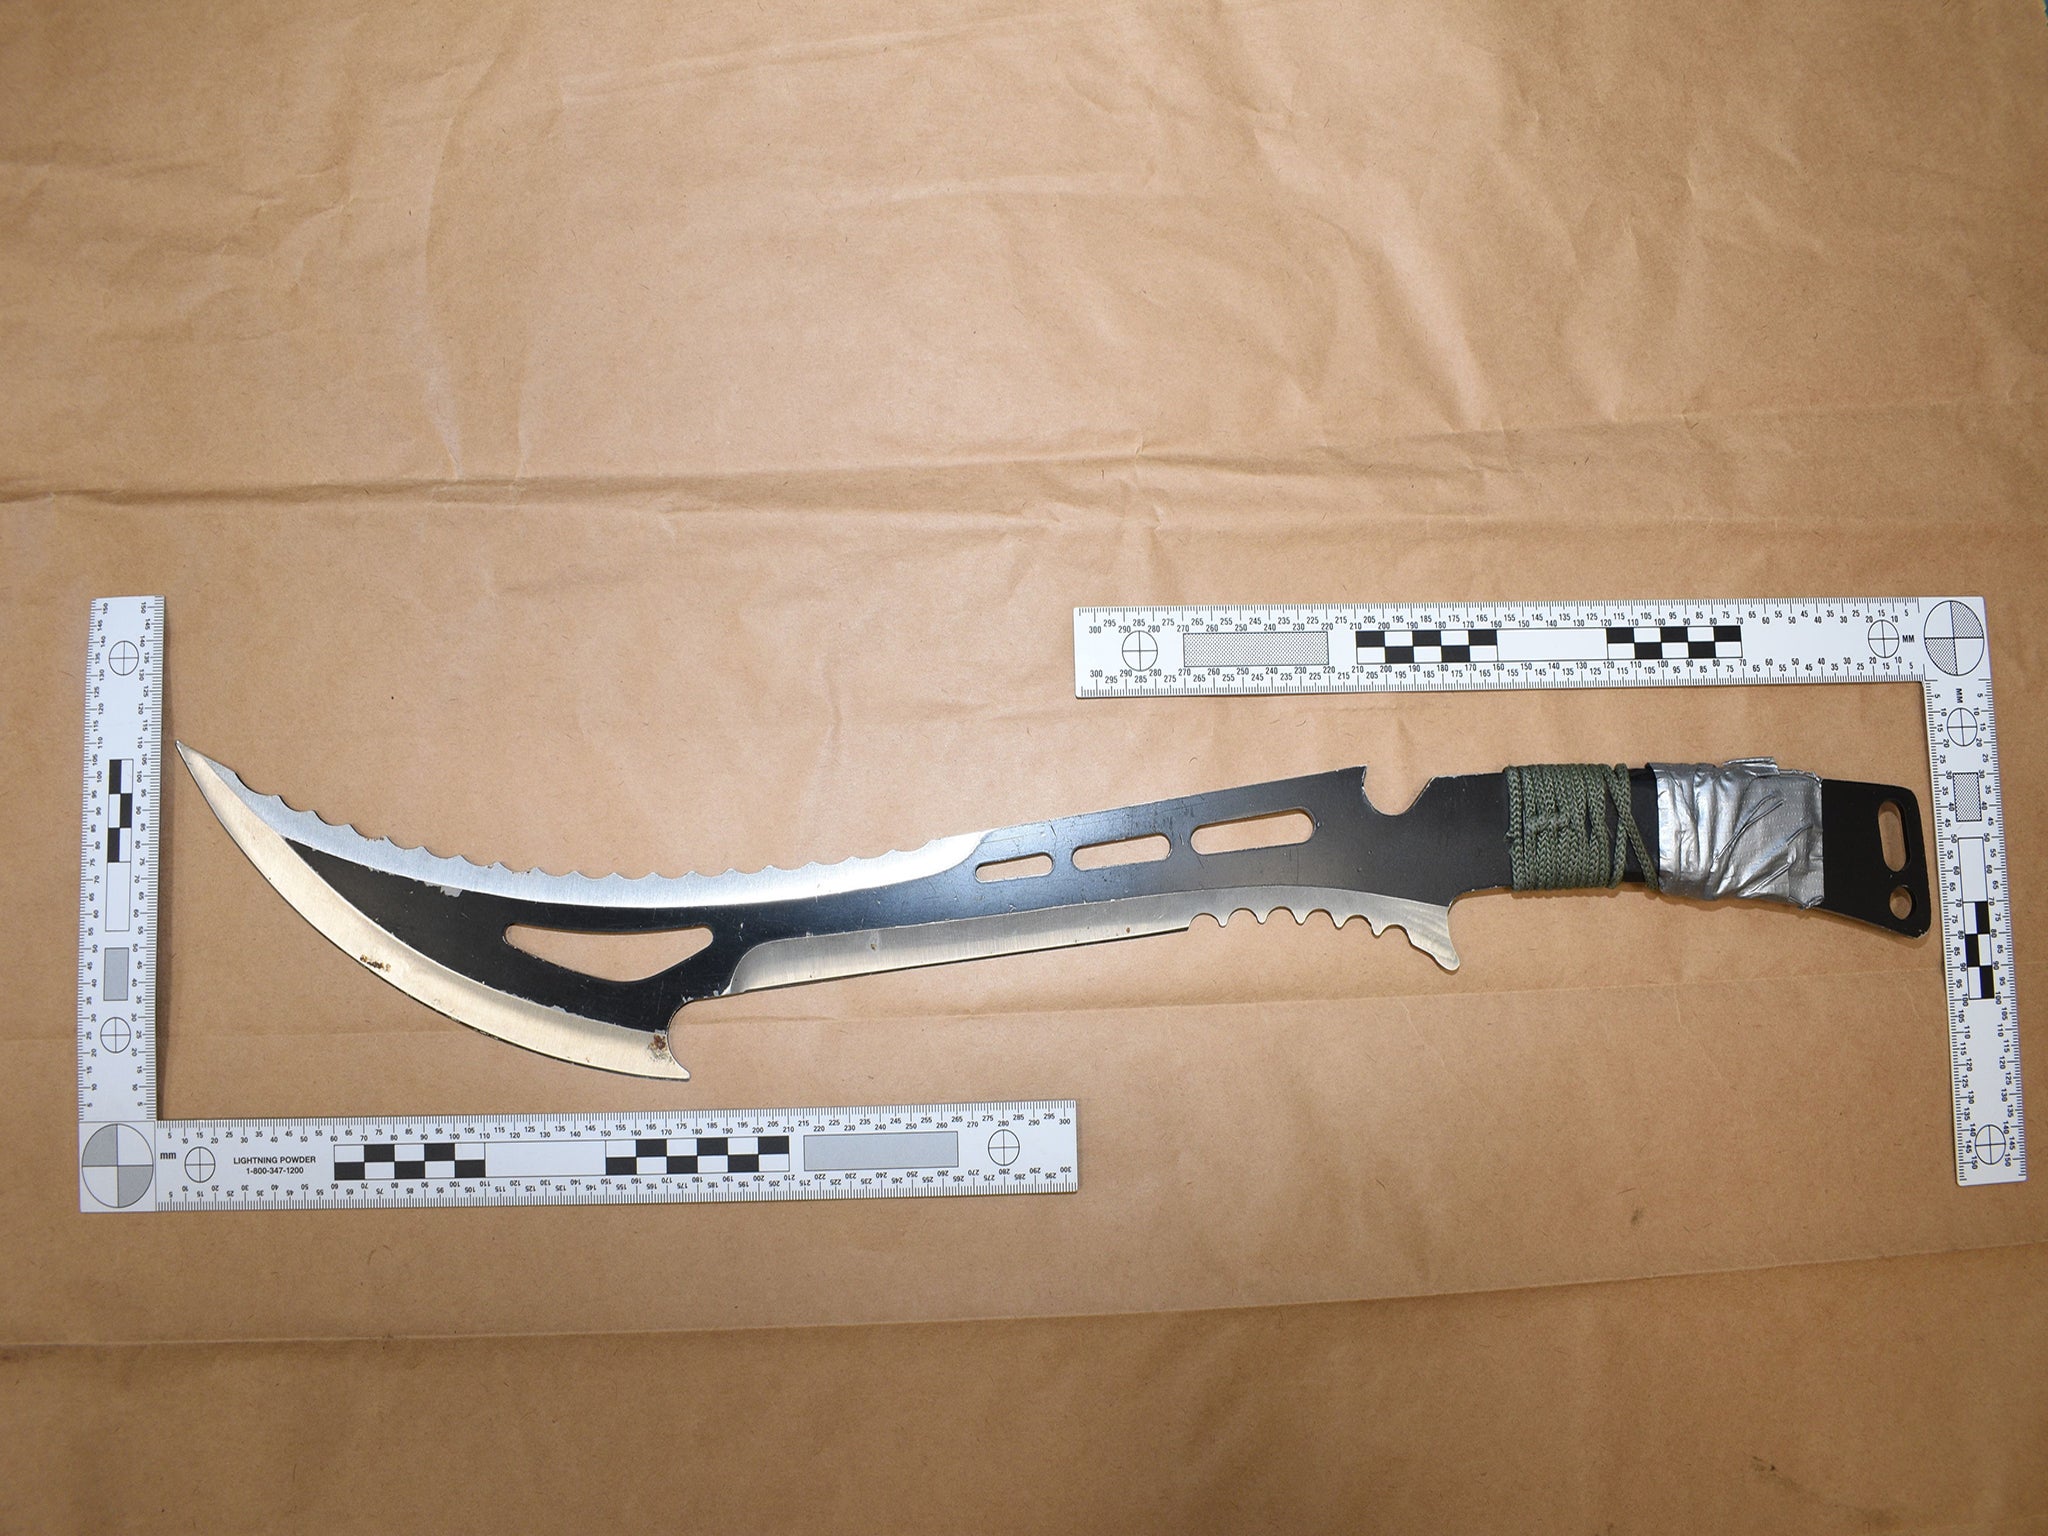 A zombie knife seized from Walker by police weeks before attack